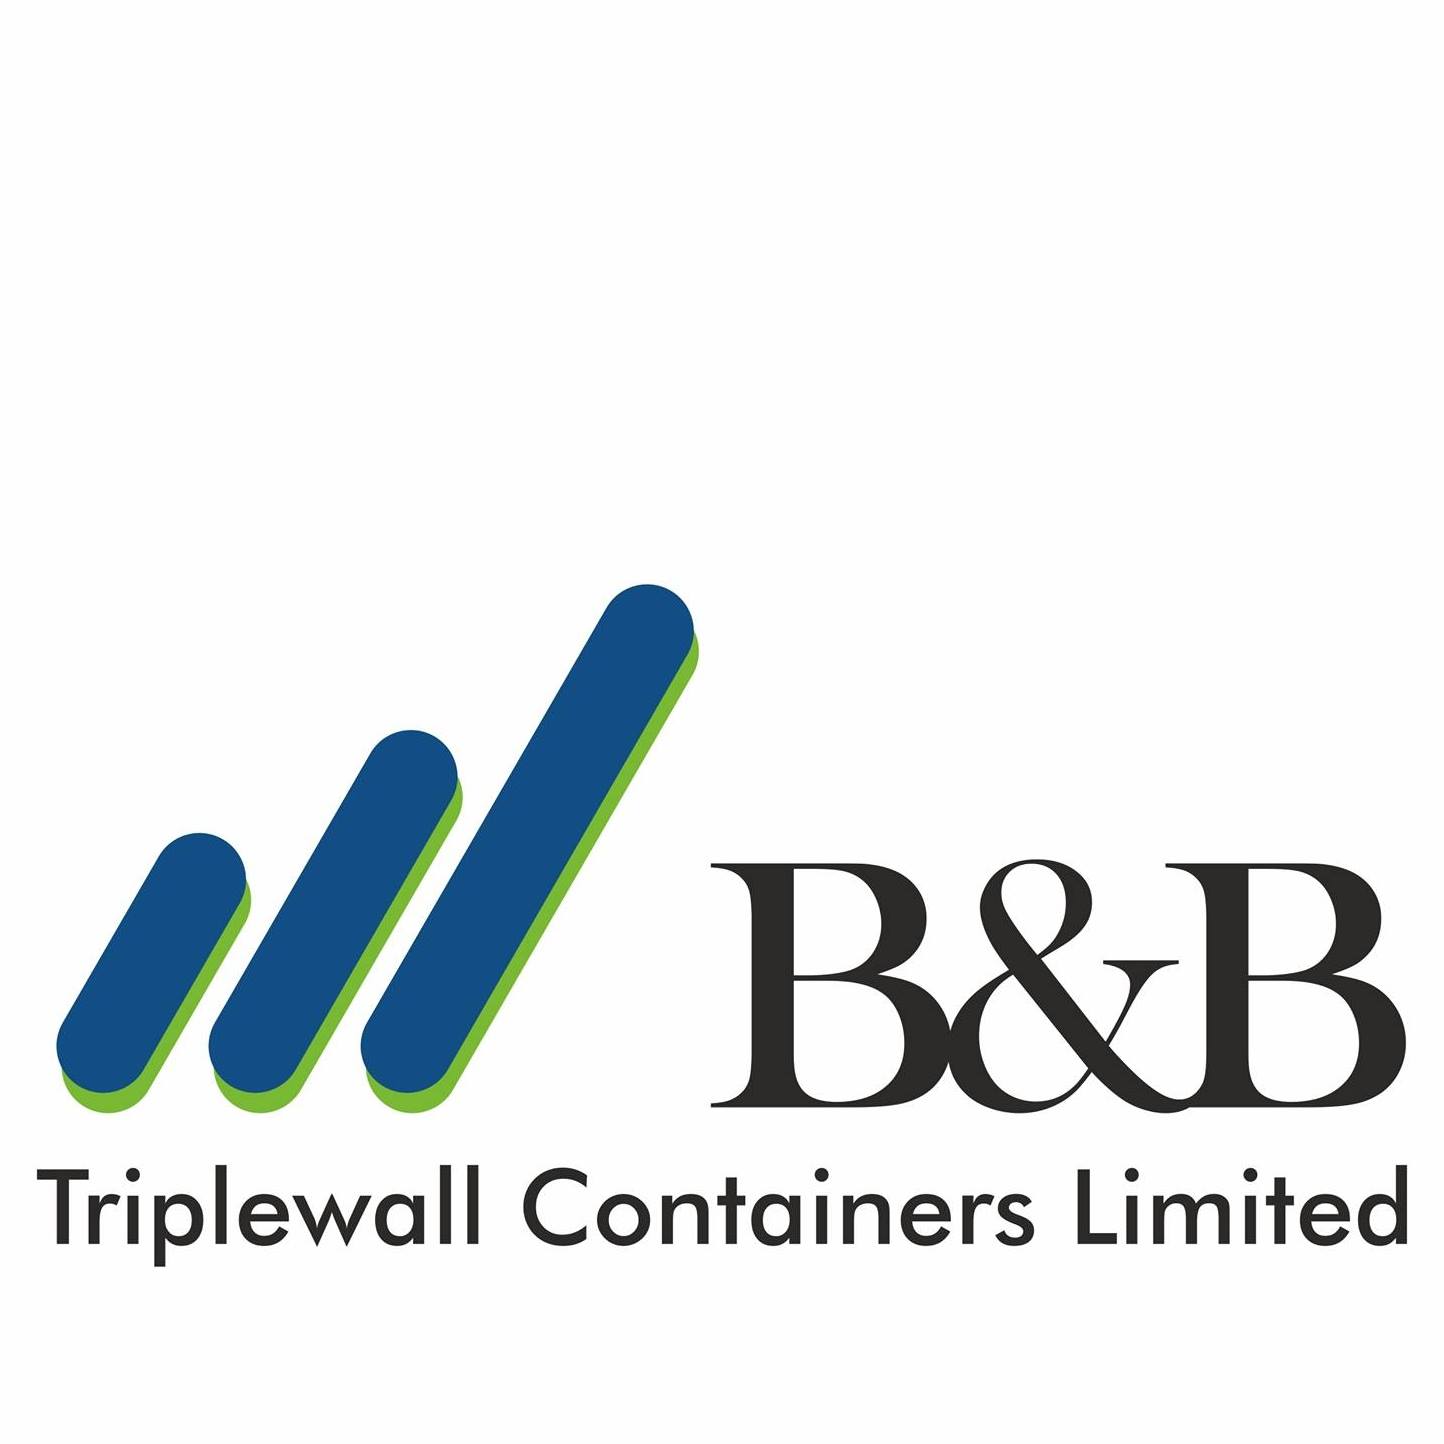 B&B Triplewall Containers